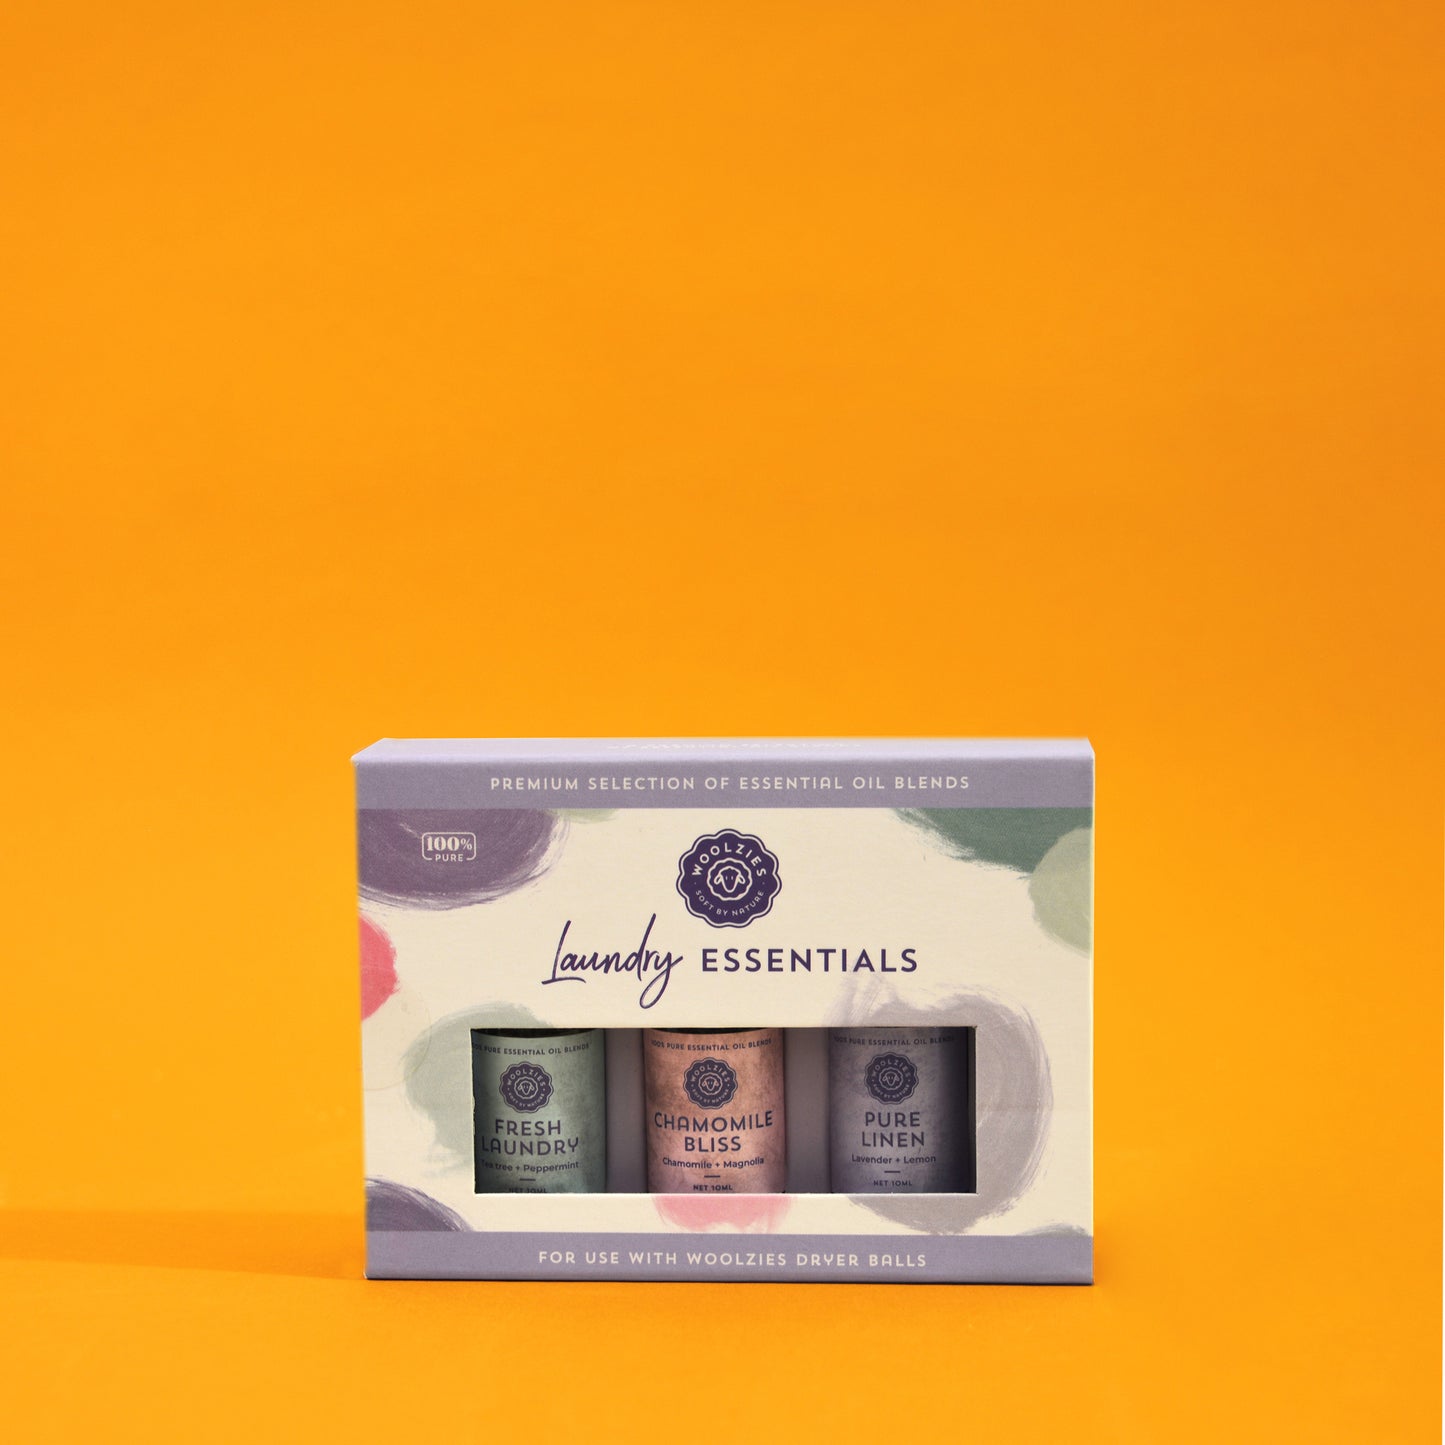 A box of three essential oil blends by Woolzies labeled Fresh Laundry, Chamomile Bliss and Pure Linen